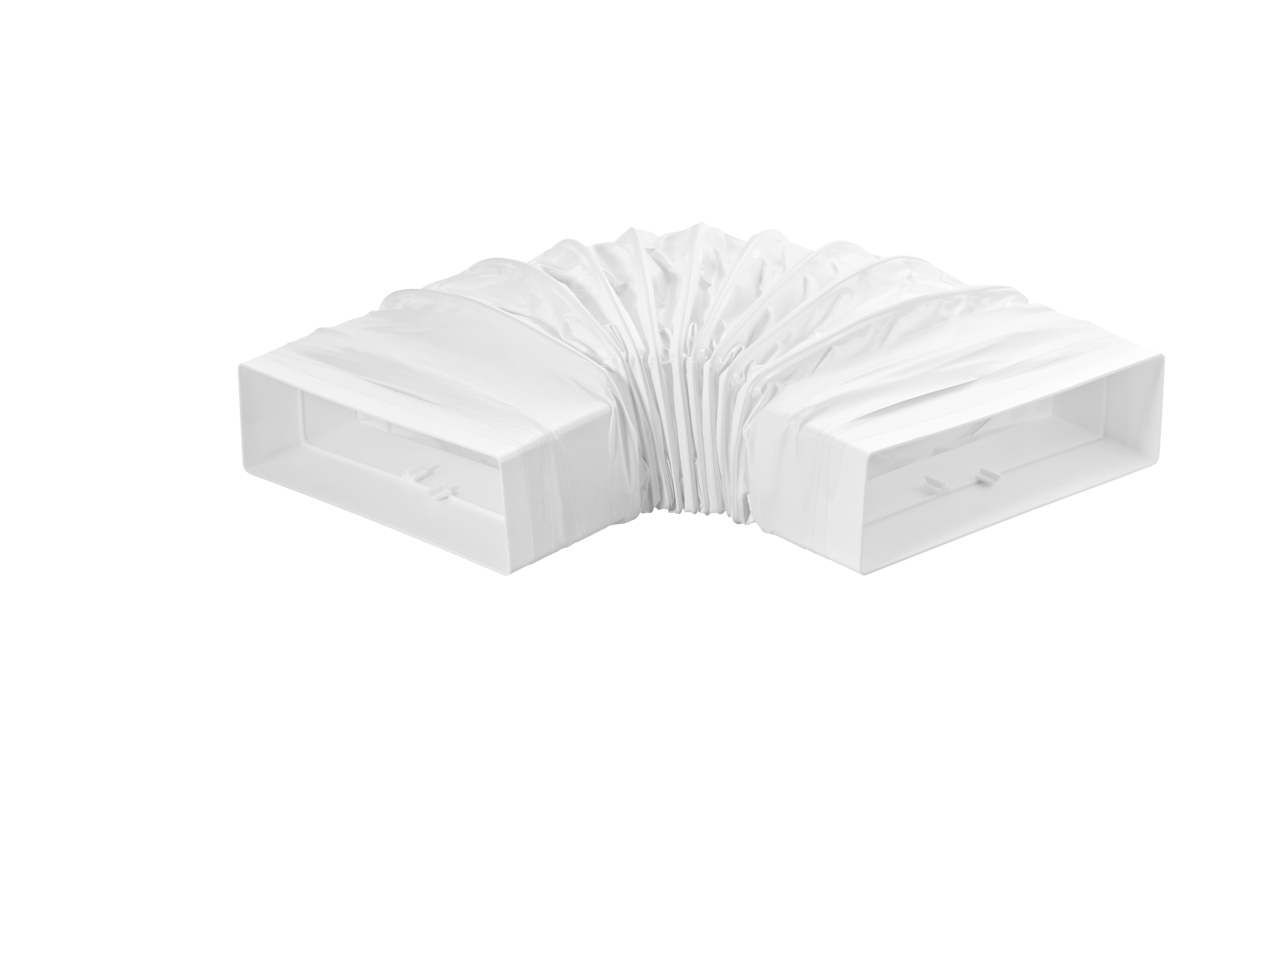  T-RBFLEX 125 wide duct bend, white